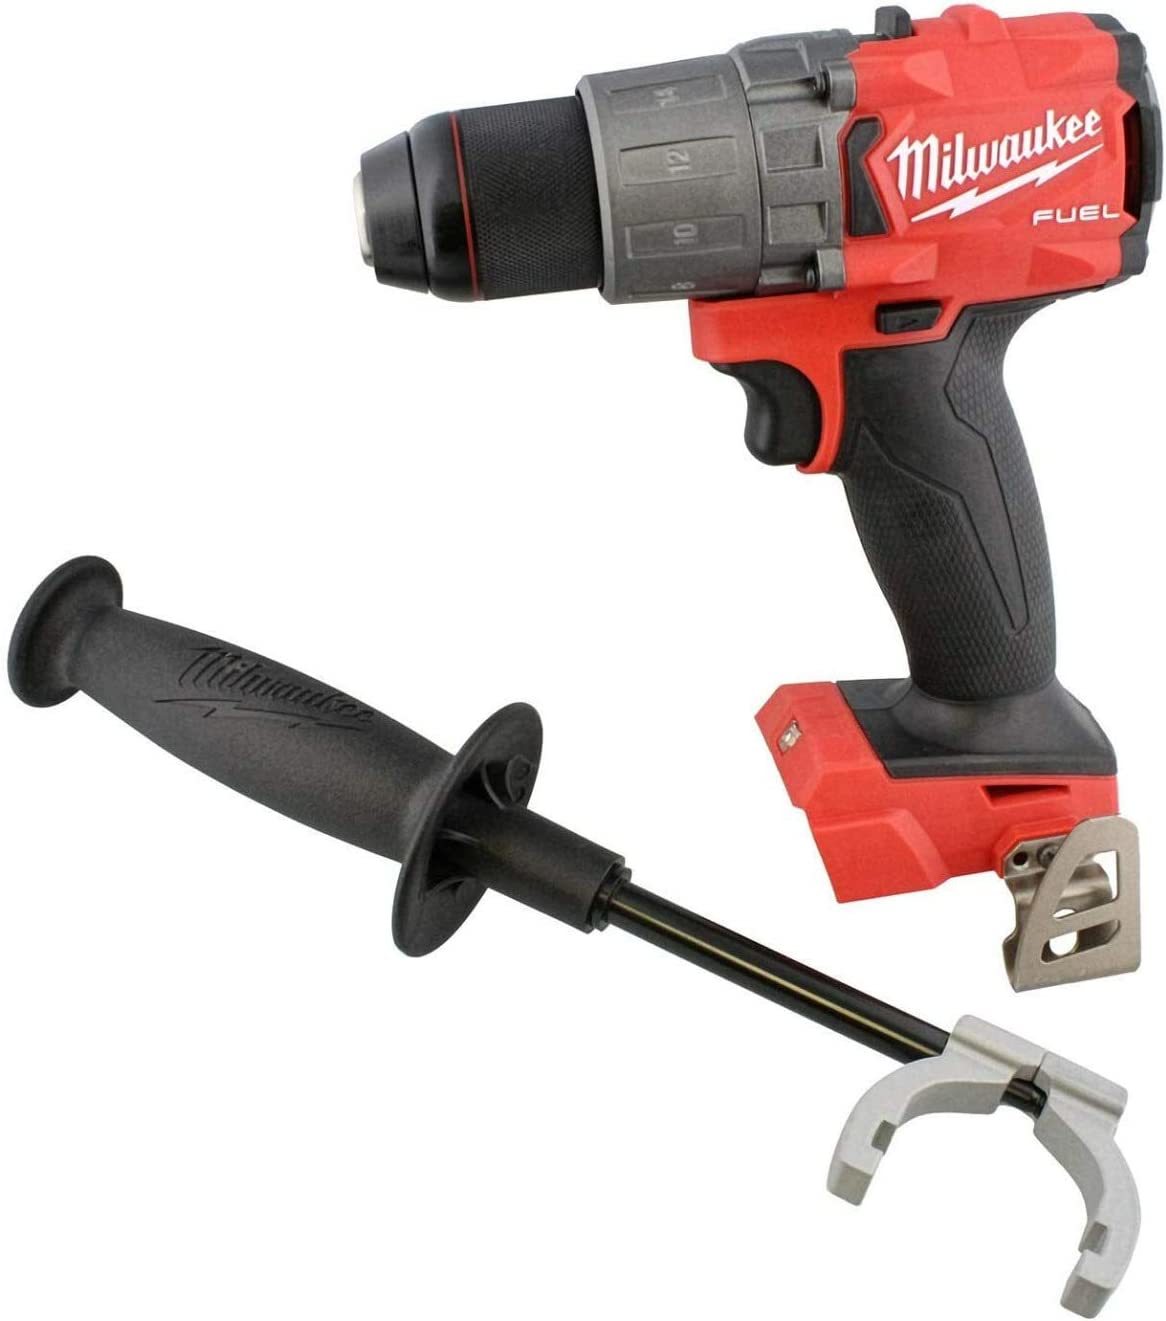 1/2" Drill/Driver (Bare Tool) With A Peak Torque Of 1,200 In-Lbs., 20 M18 Fuel. - $173.92